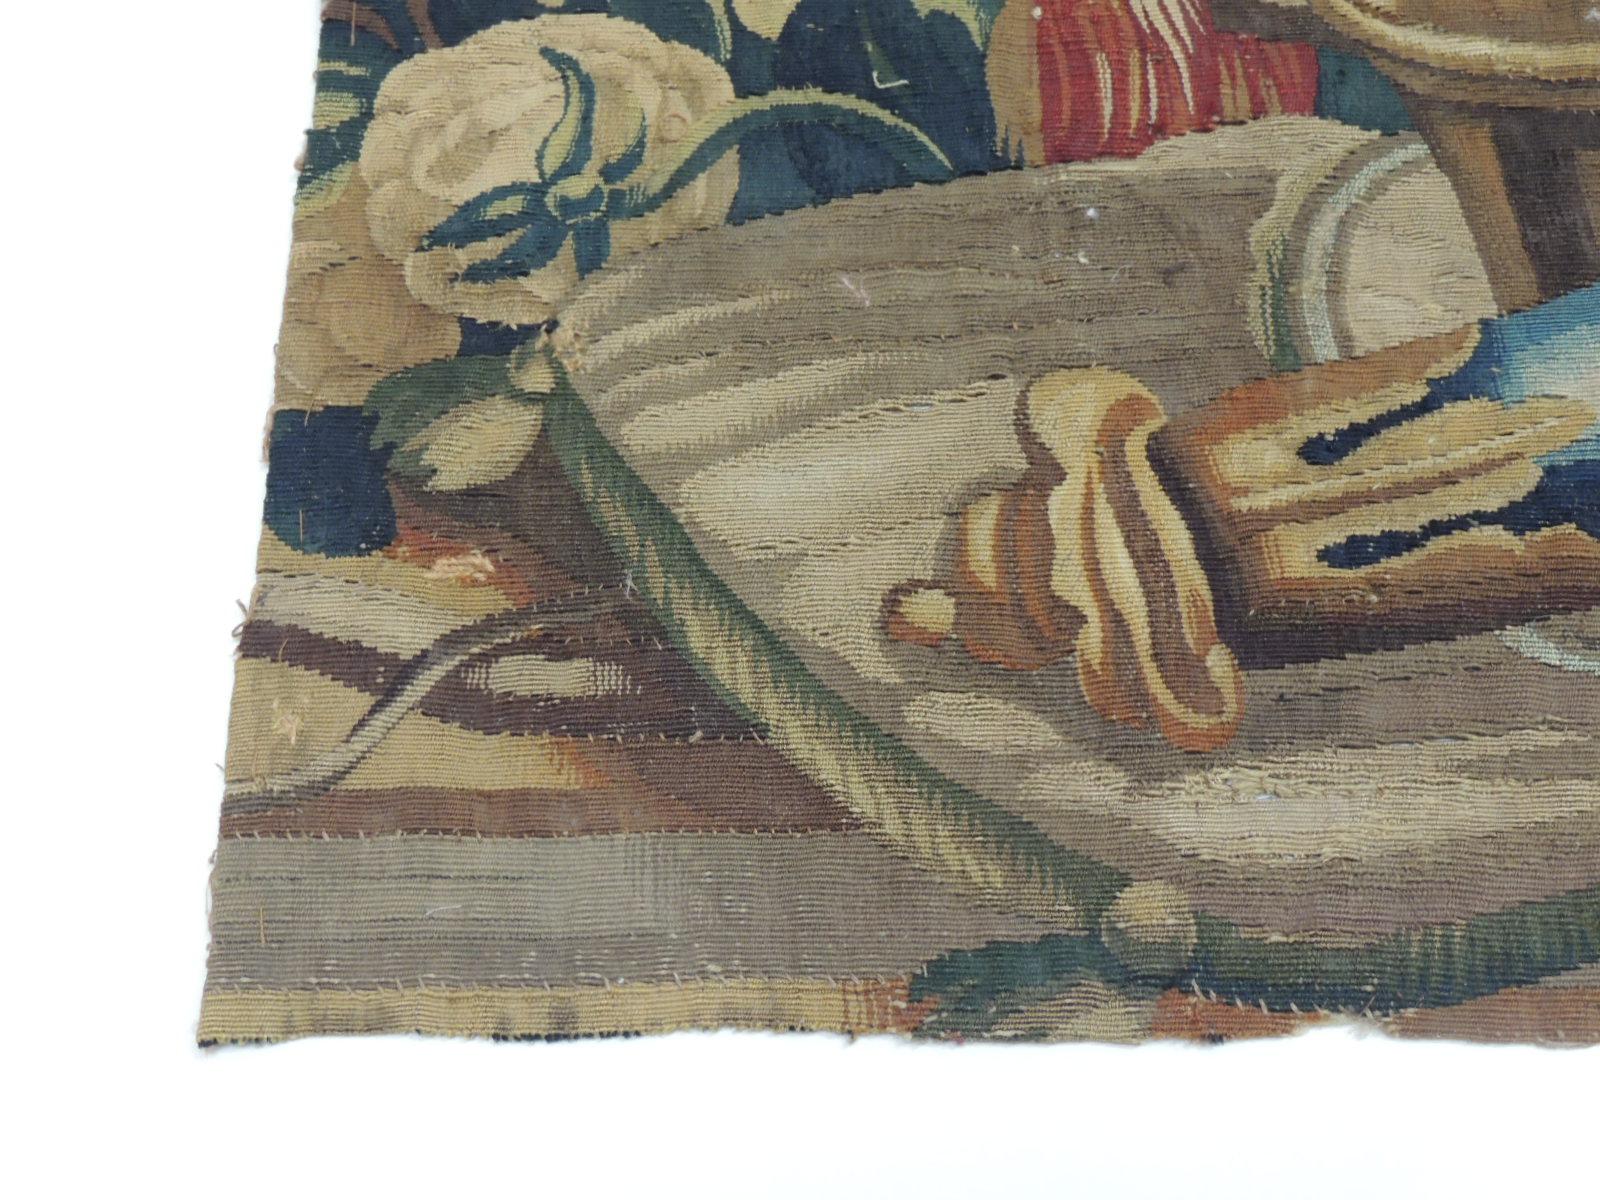 This fragment depicts archery and hunting instruments on top of a cushion.
Tassels, flowers cups and vines are depicted throughout. In shades of gold, green, blue, red, yellow and brown.
Ideal for the centre of a pillow or to frame it in a shadow